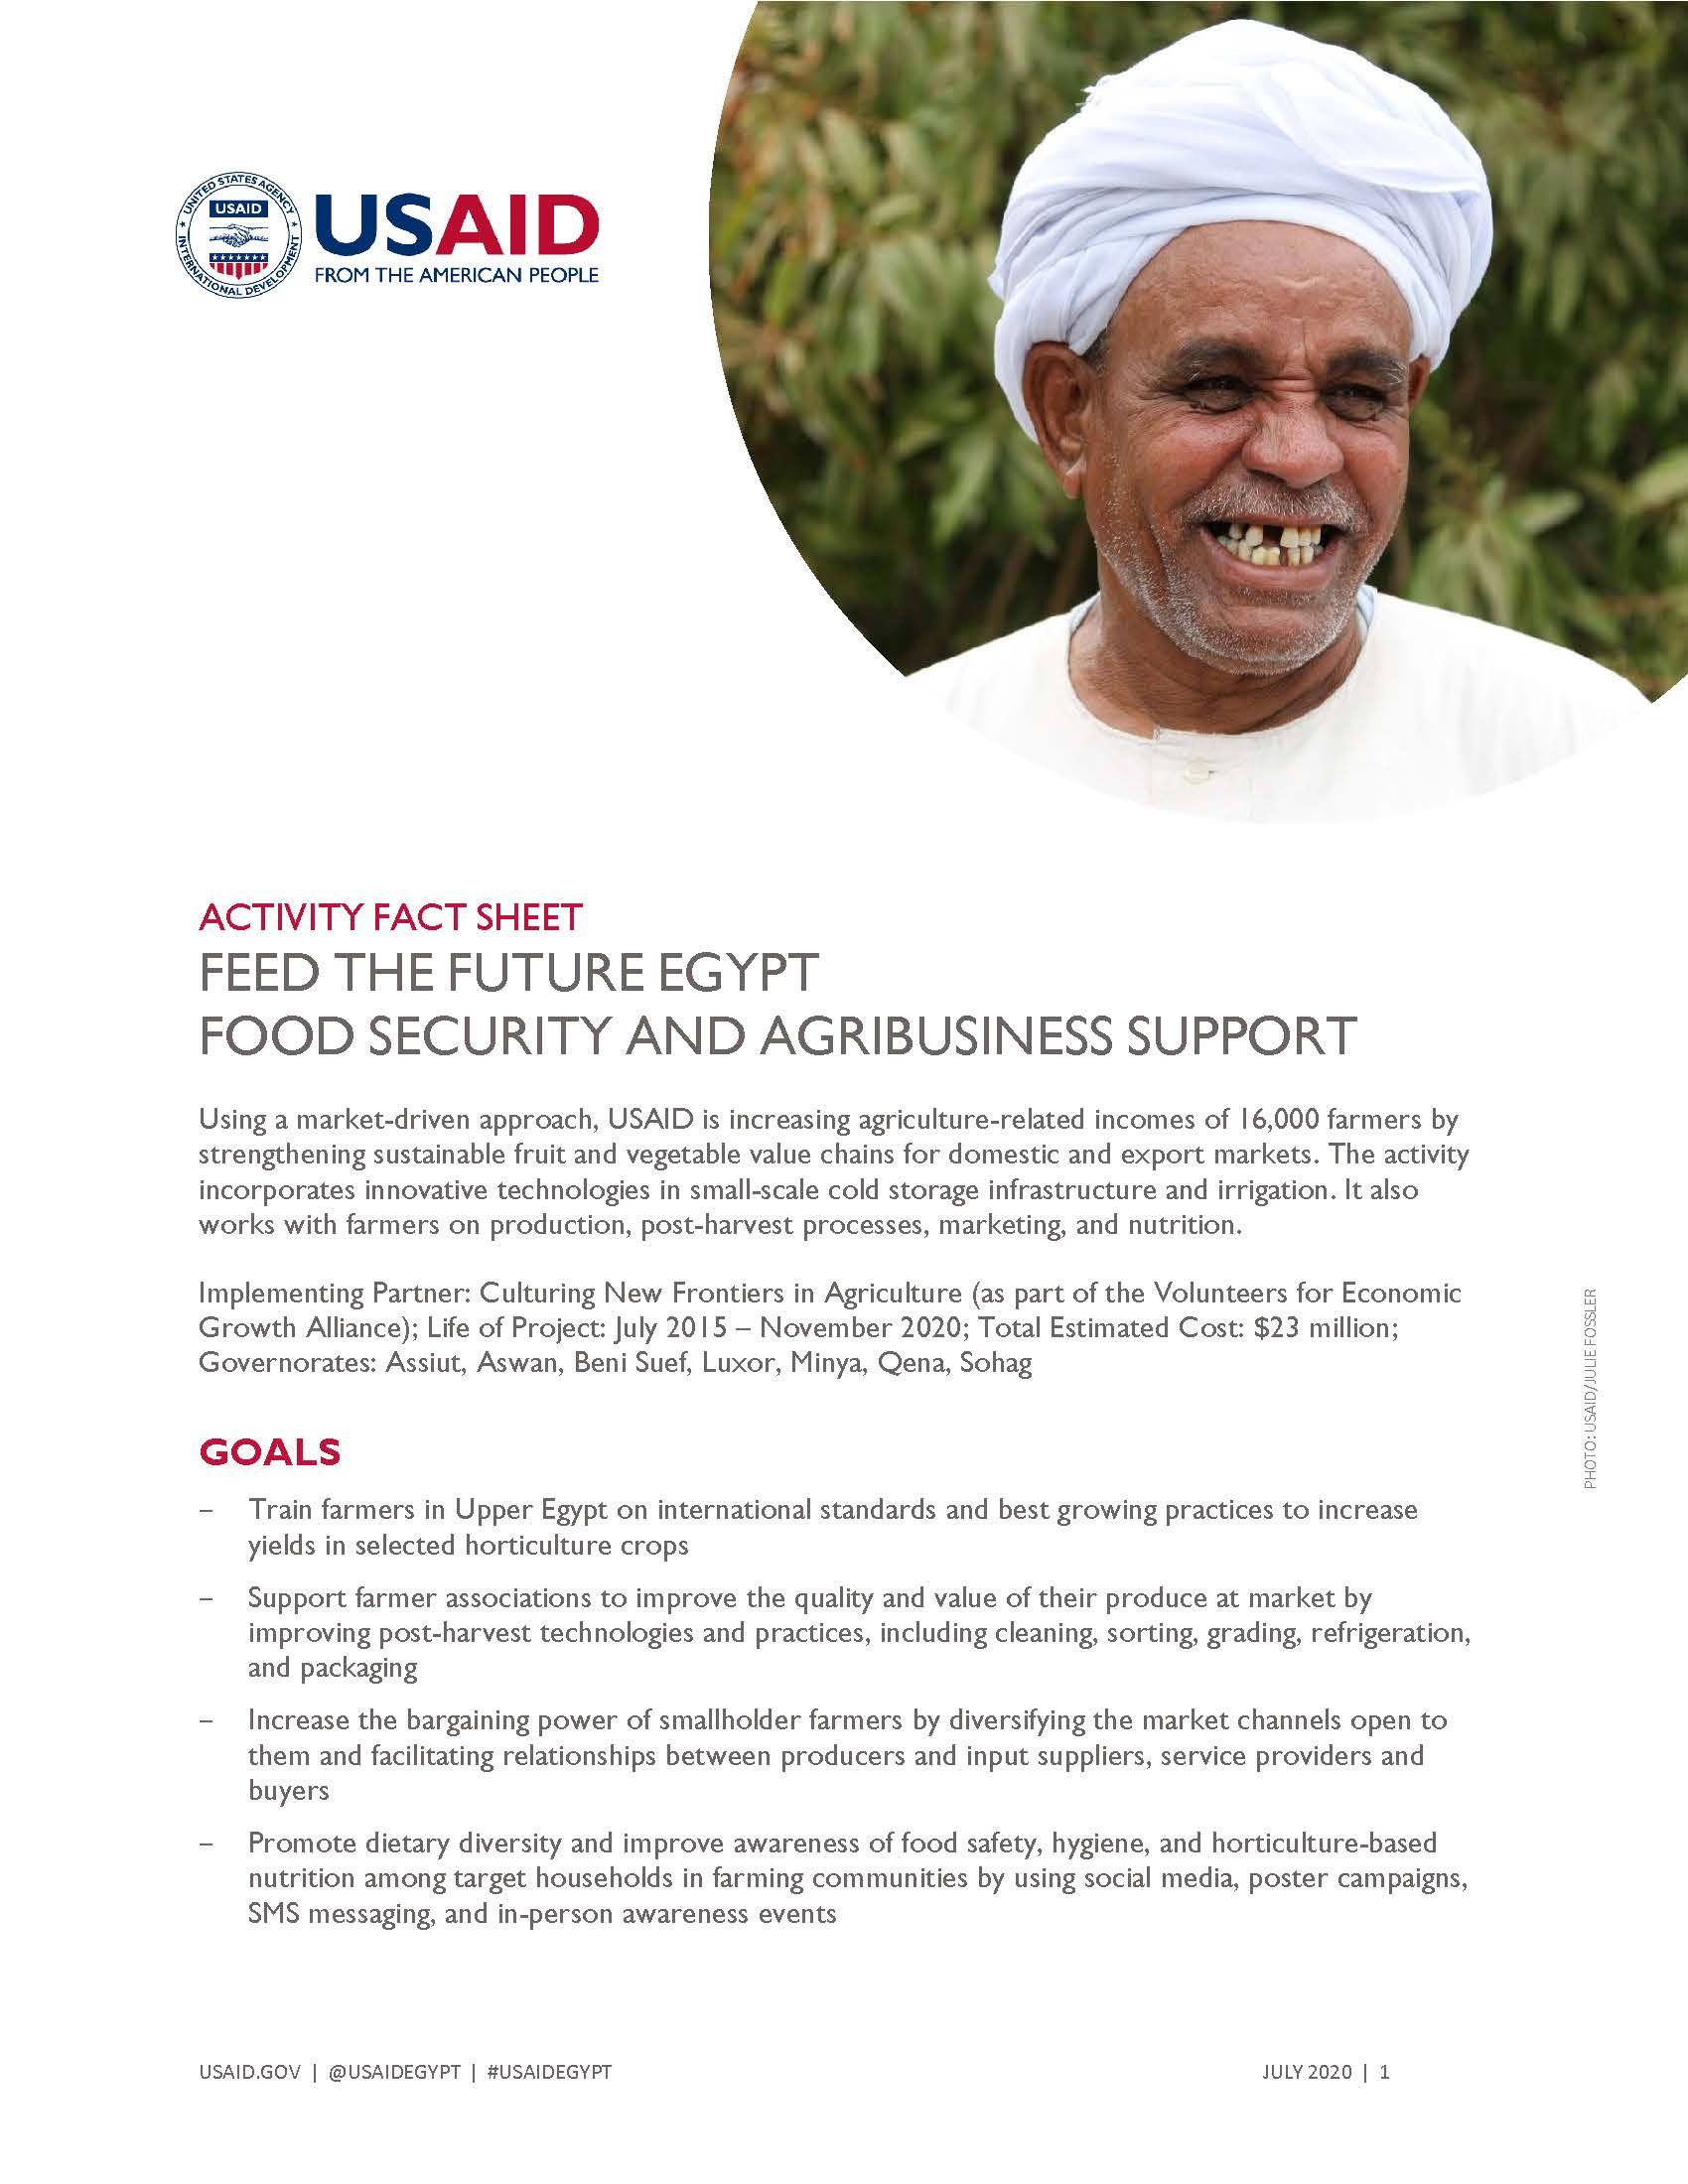 USAID/Egypt Activity Fact Sheet: Feed the Future Egypt Food Security and Agribusiness Support